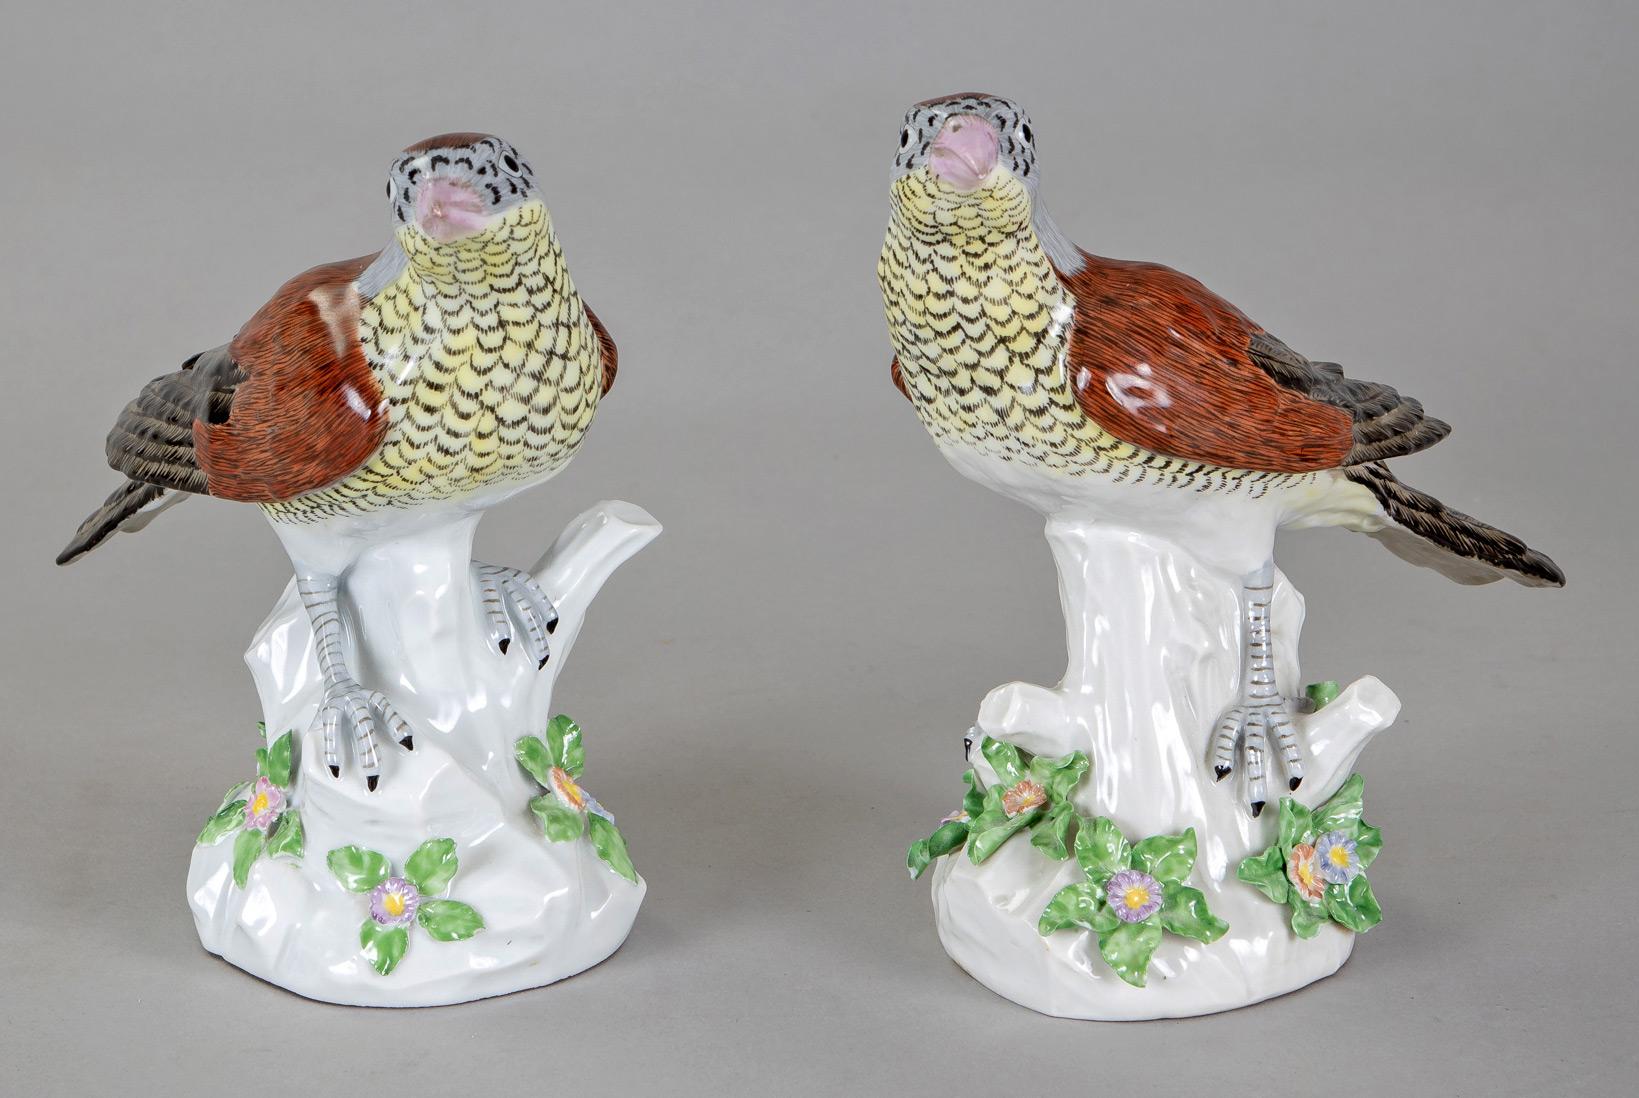 Pair of Edme Samson porcelain birds with pink beak, yellow and black chest, brown body and black tail feathers, perched on a tree stump surrounded by colorful floral designs. At the back is a Samson Meissen style mark used on replicas of German